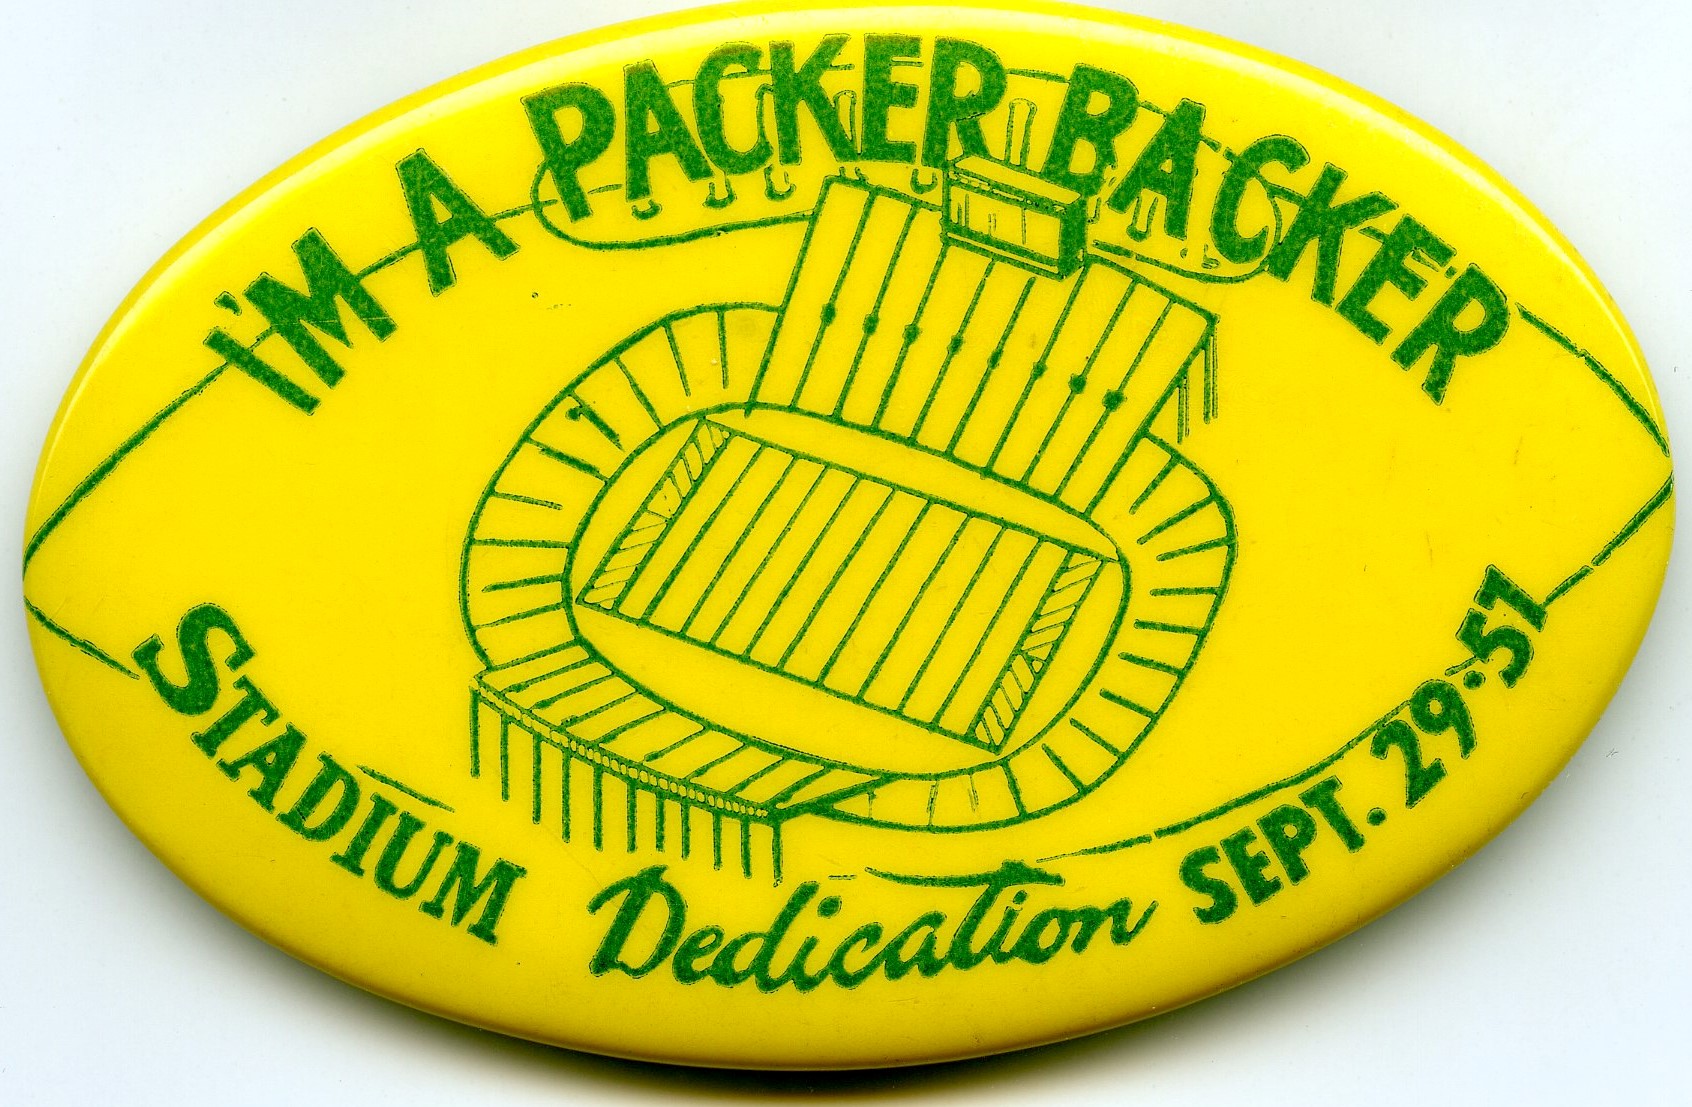 A pin dedicates the first Green Bay Packers game played at Lambeau Field